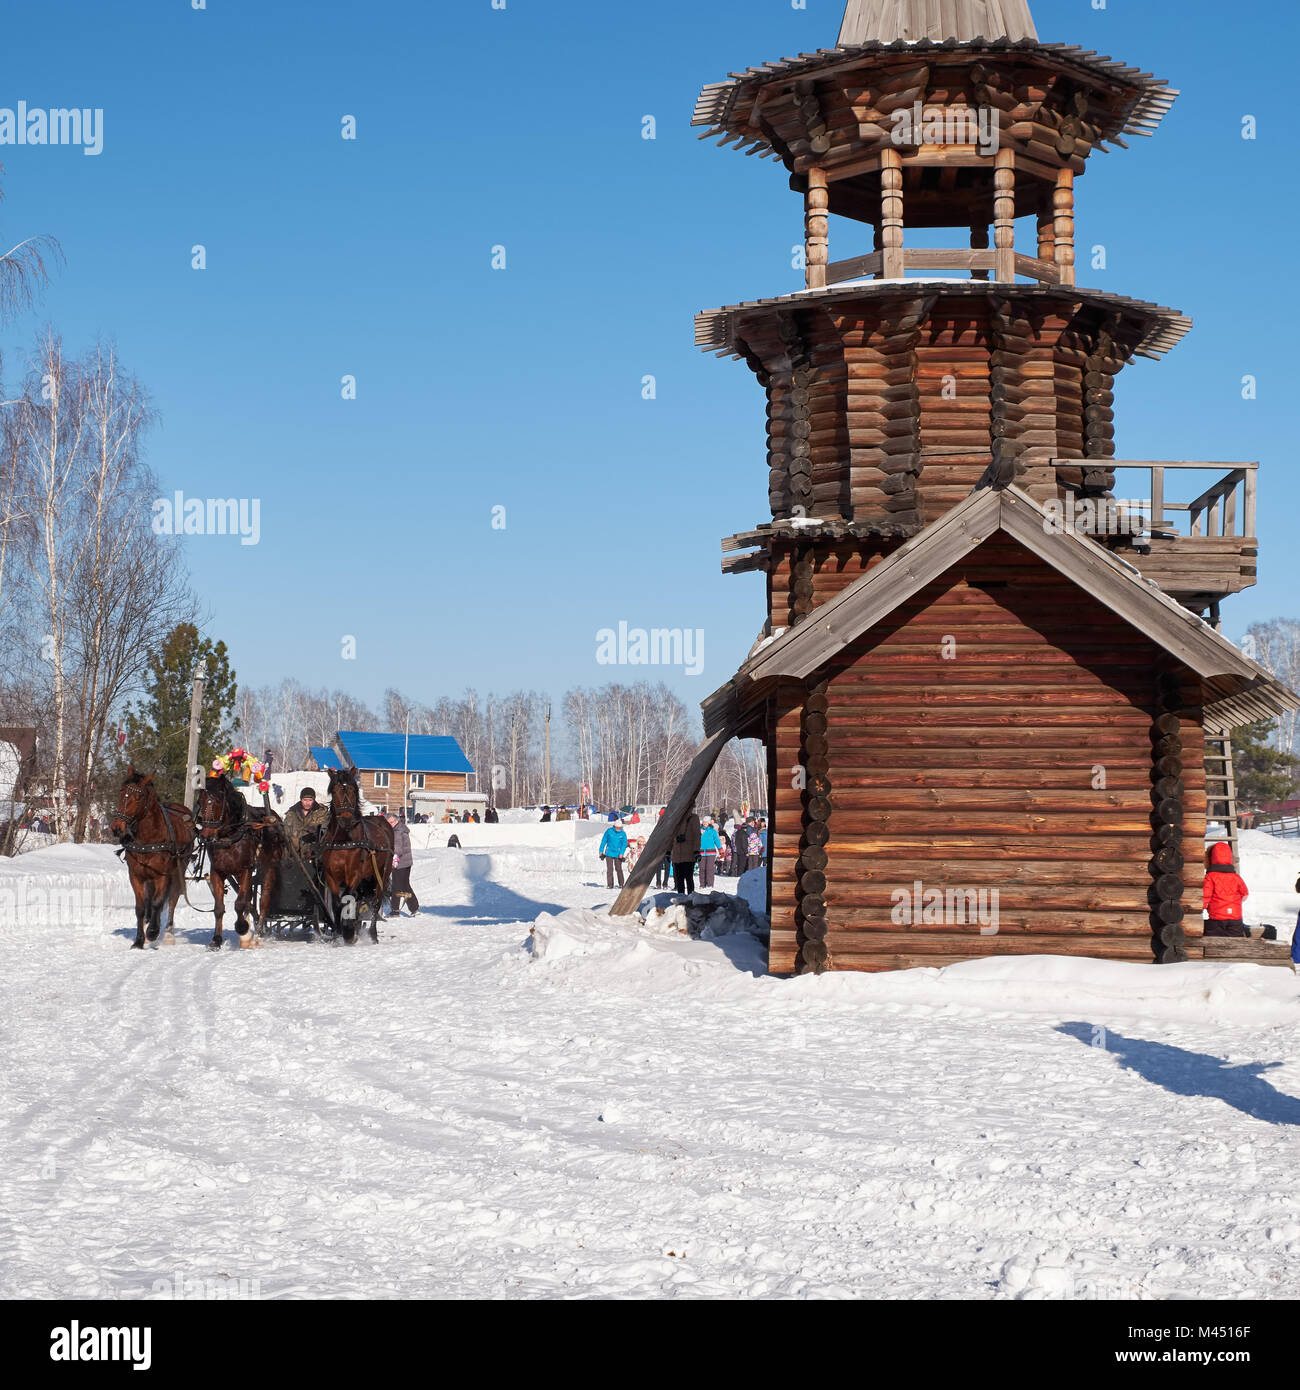 NOVOSIBIRSK, RUSSIA - JANUARY 11, 2018: Troika of horses harnessed to a sleigh.  Slavonic folk  winter festivities Shrovetide. The Church of the Savio Stock Photo